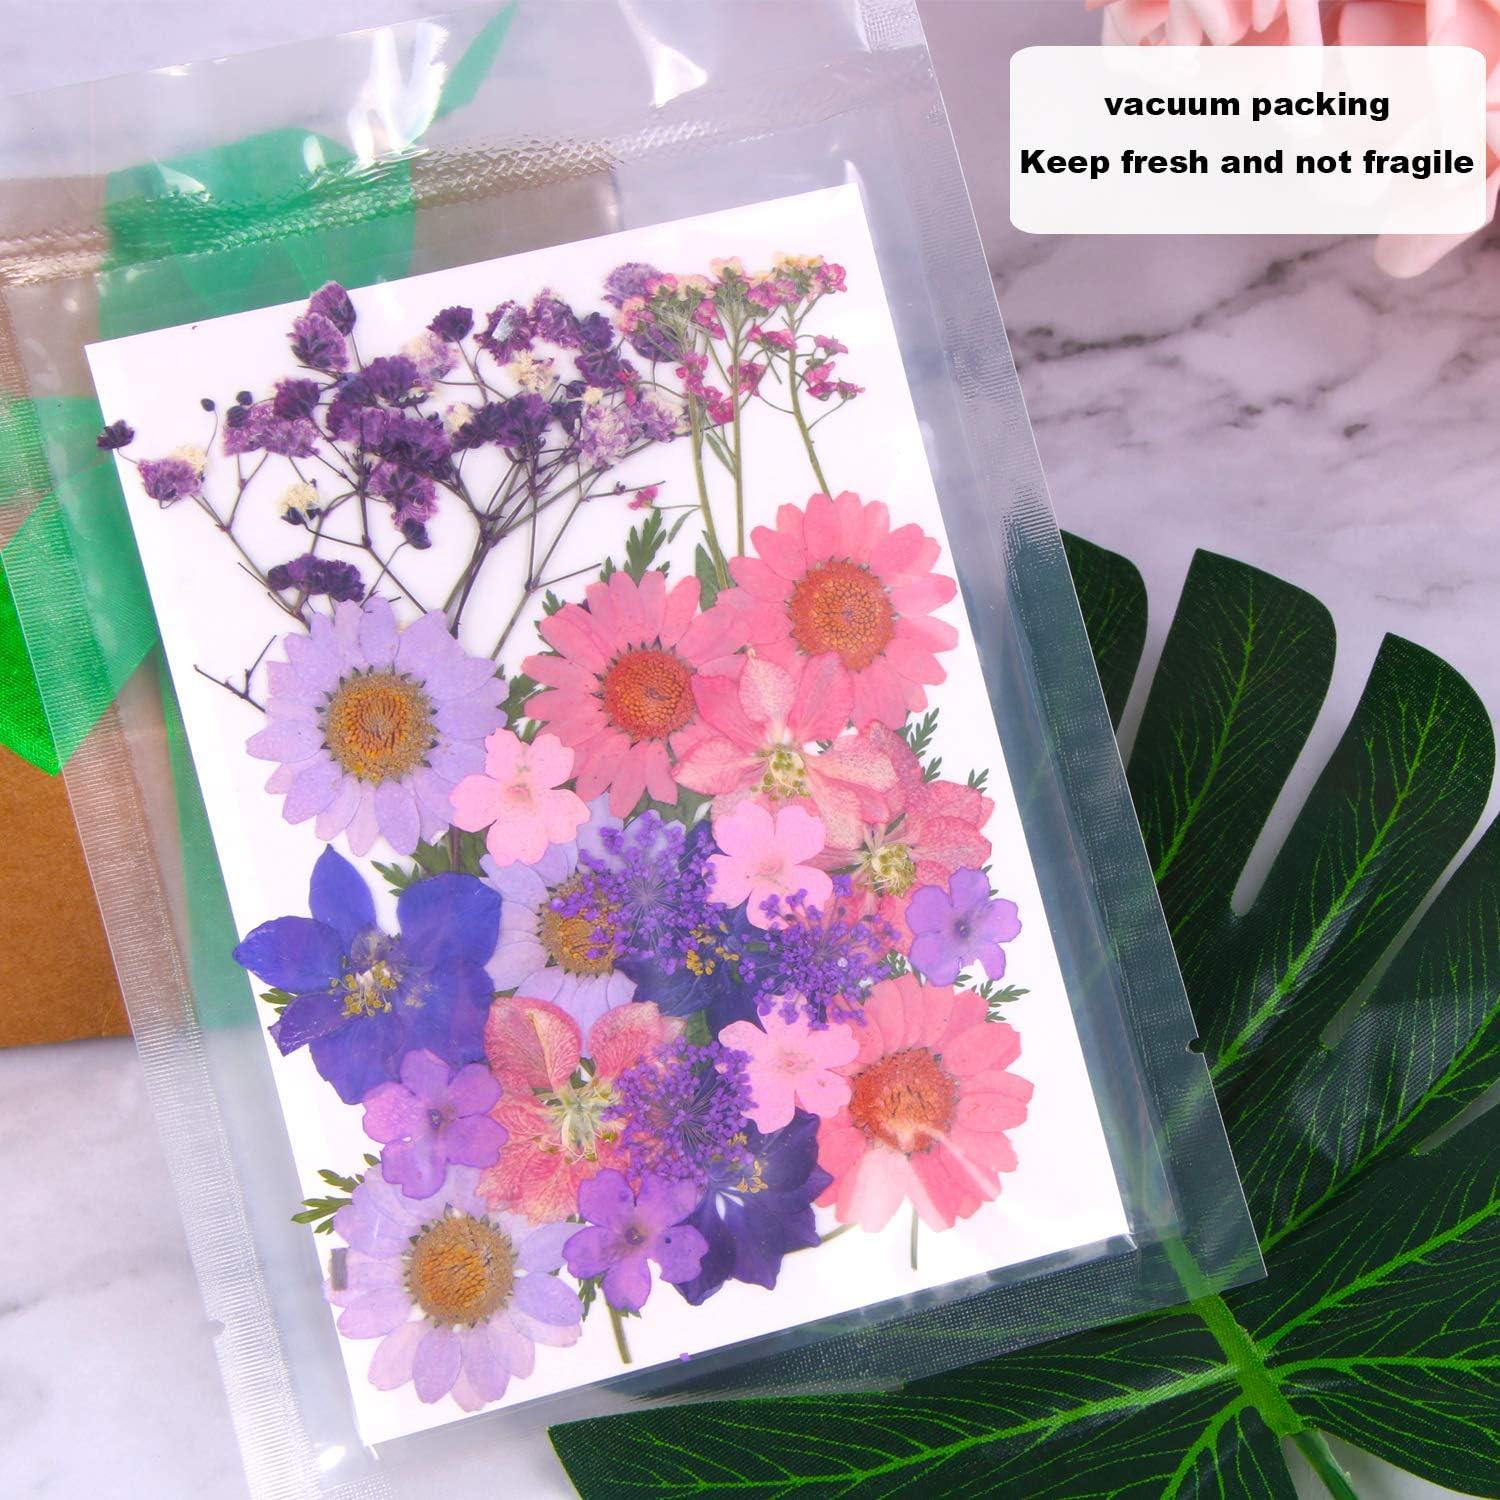 Colorful Real Dried Pressed Flowers Scrapbooking DIY Art Crafts Dried Flowers for Art Makeup Floral Decors 13